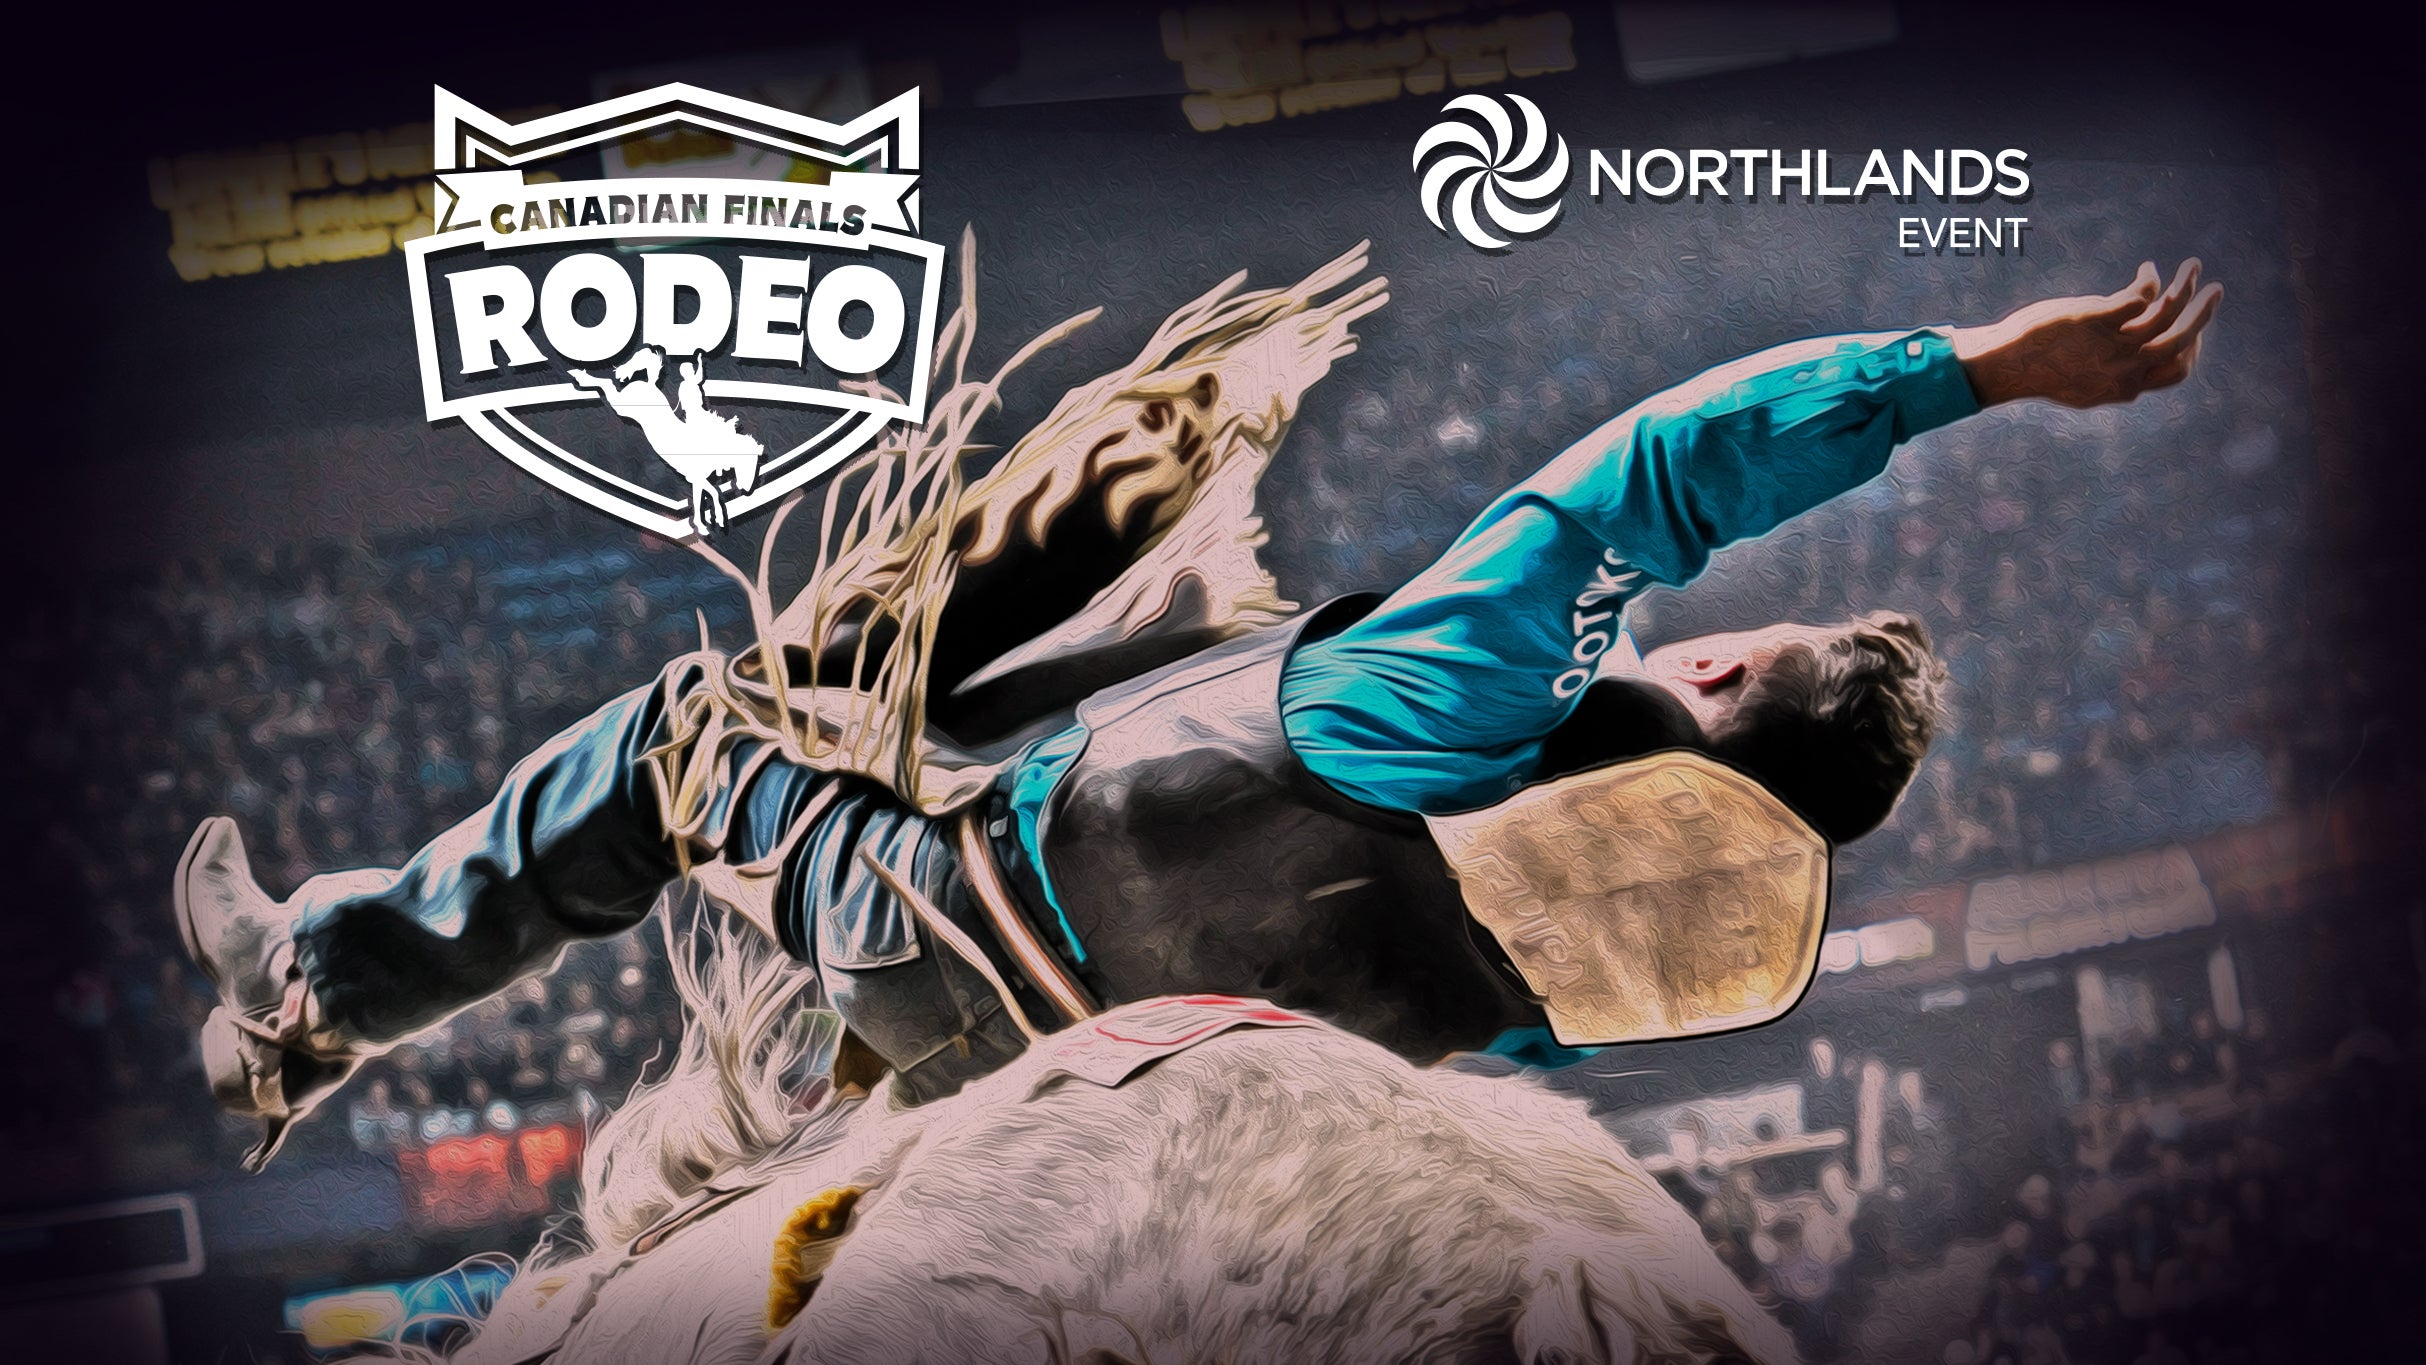 Canadian Finals Rodeo pre-sale code